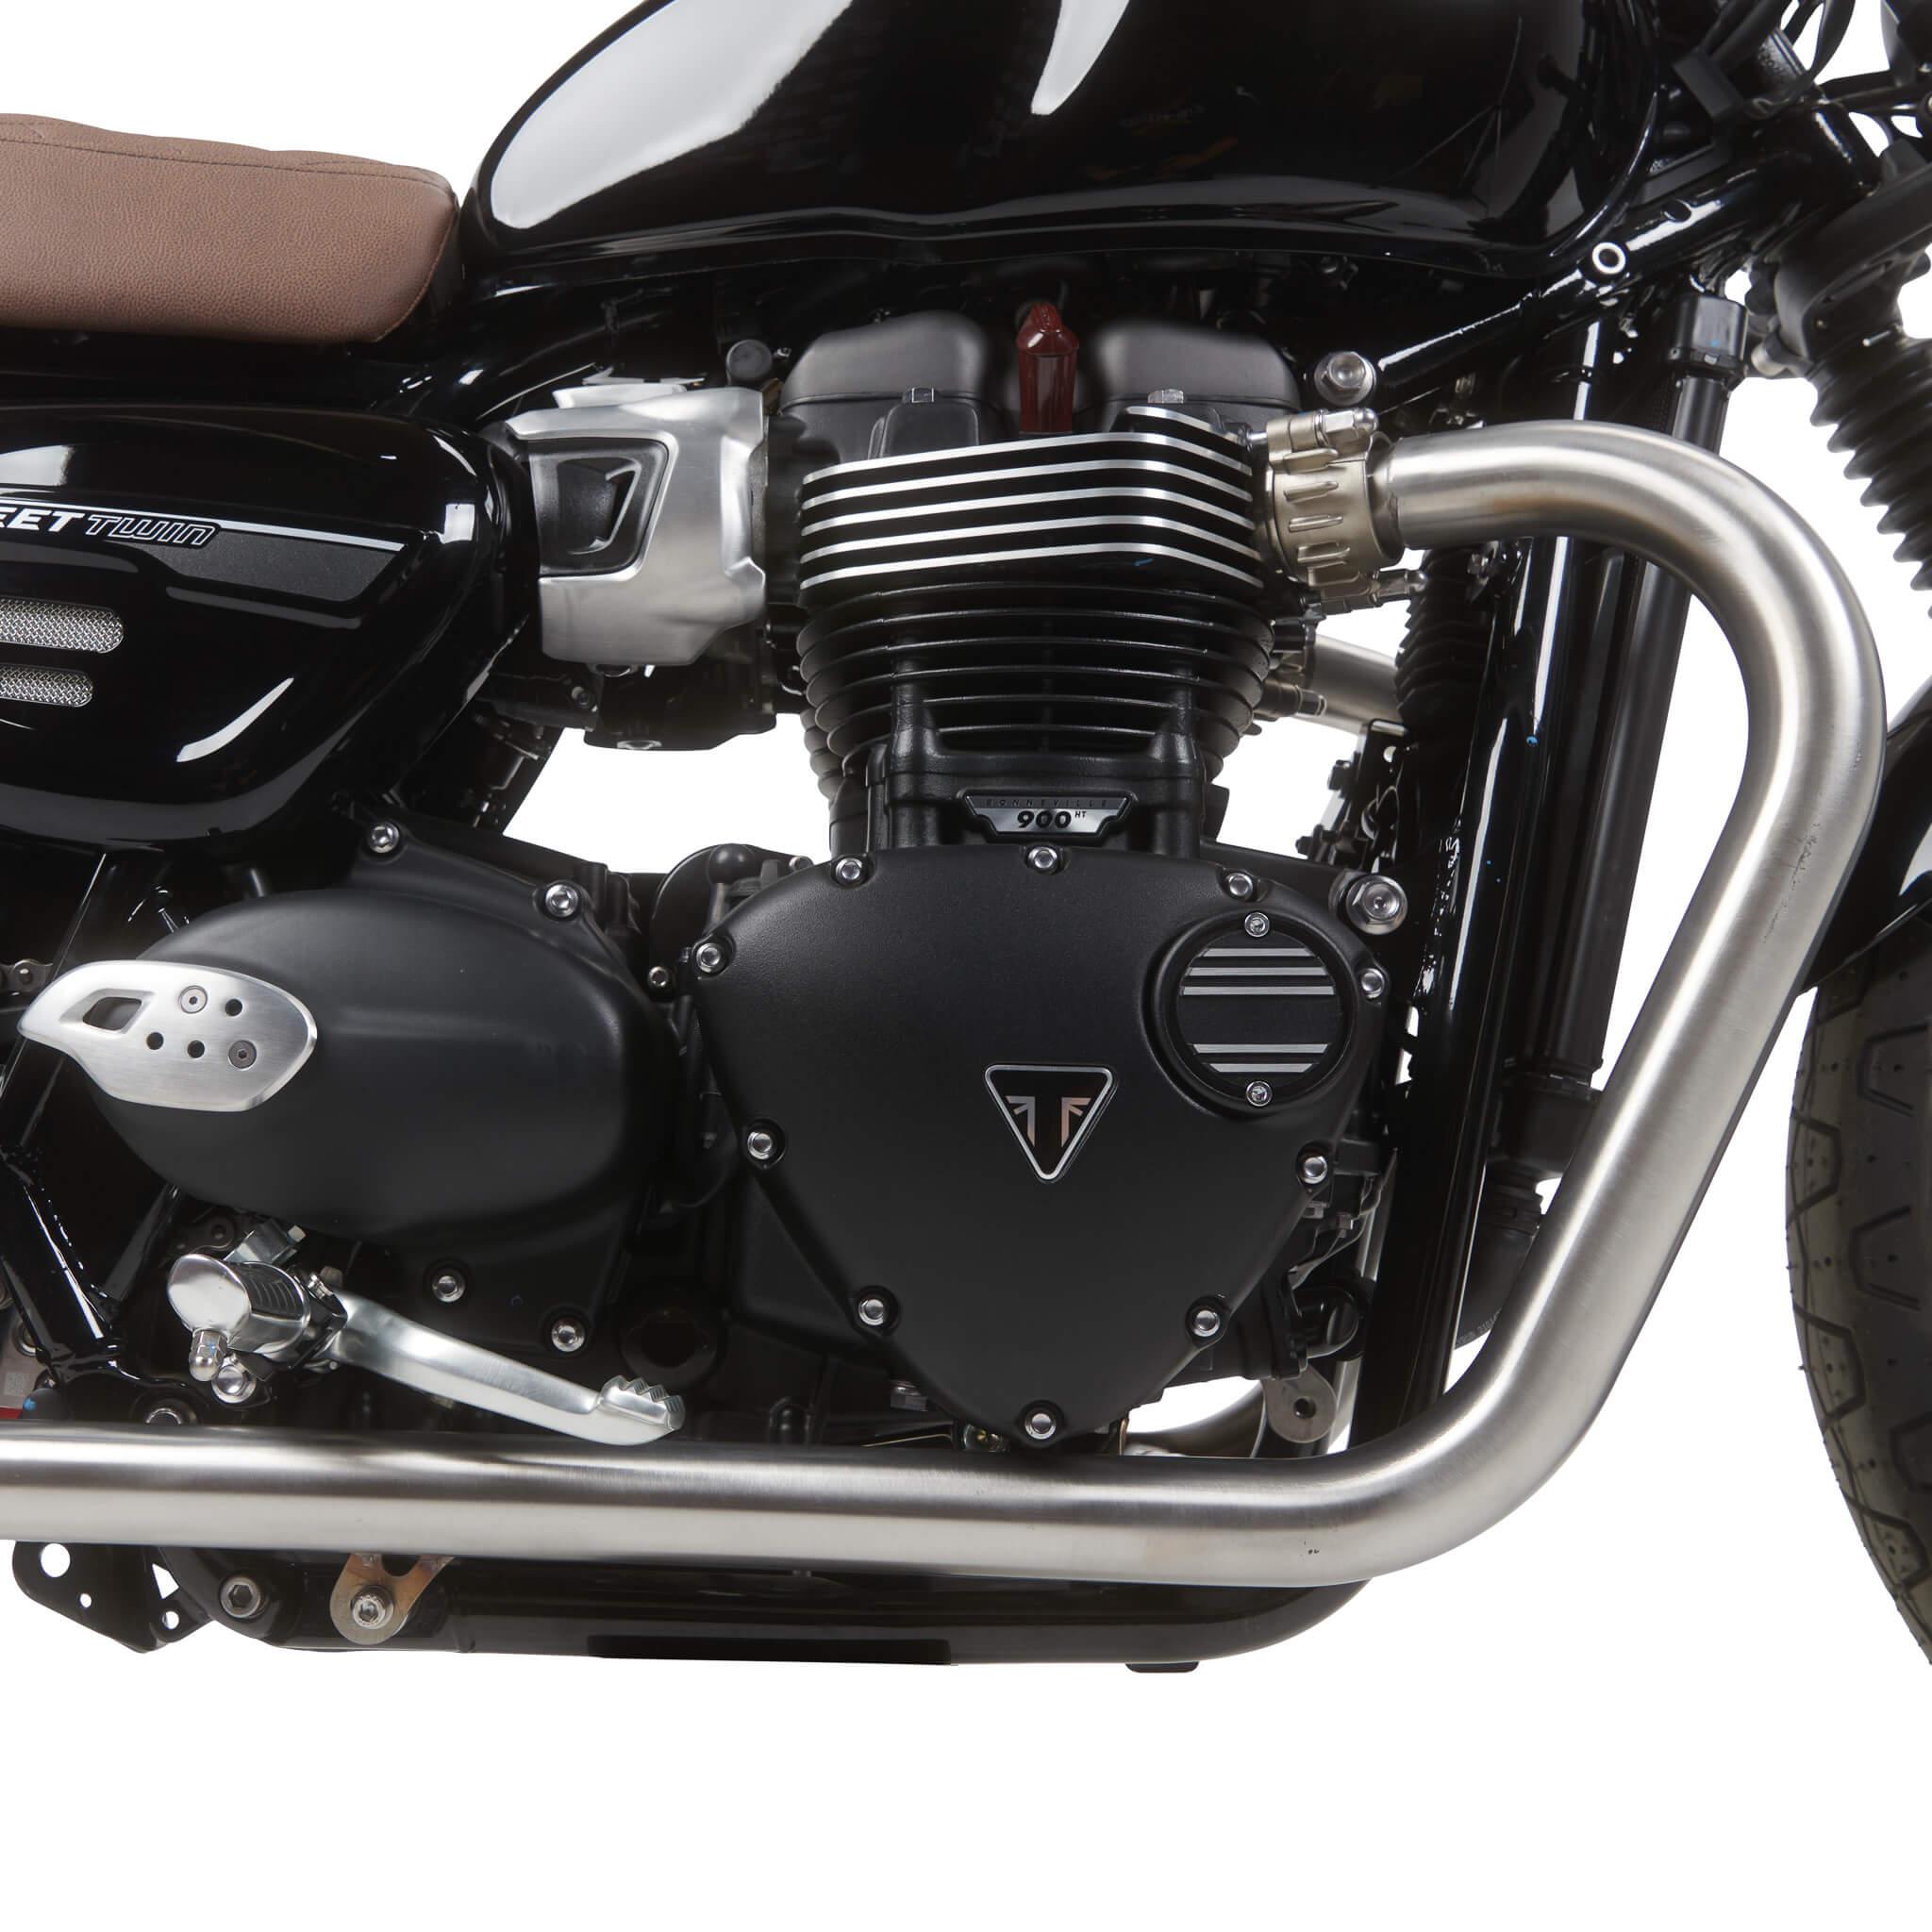 2-2 Drag Pipe Exhaust for Triumph Bonneville / Street / Speed Twin 900 - British Customs